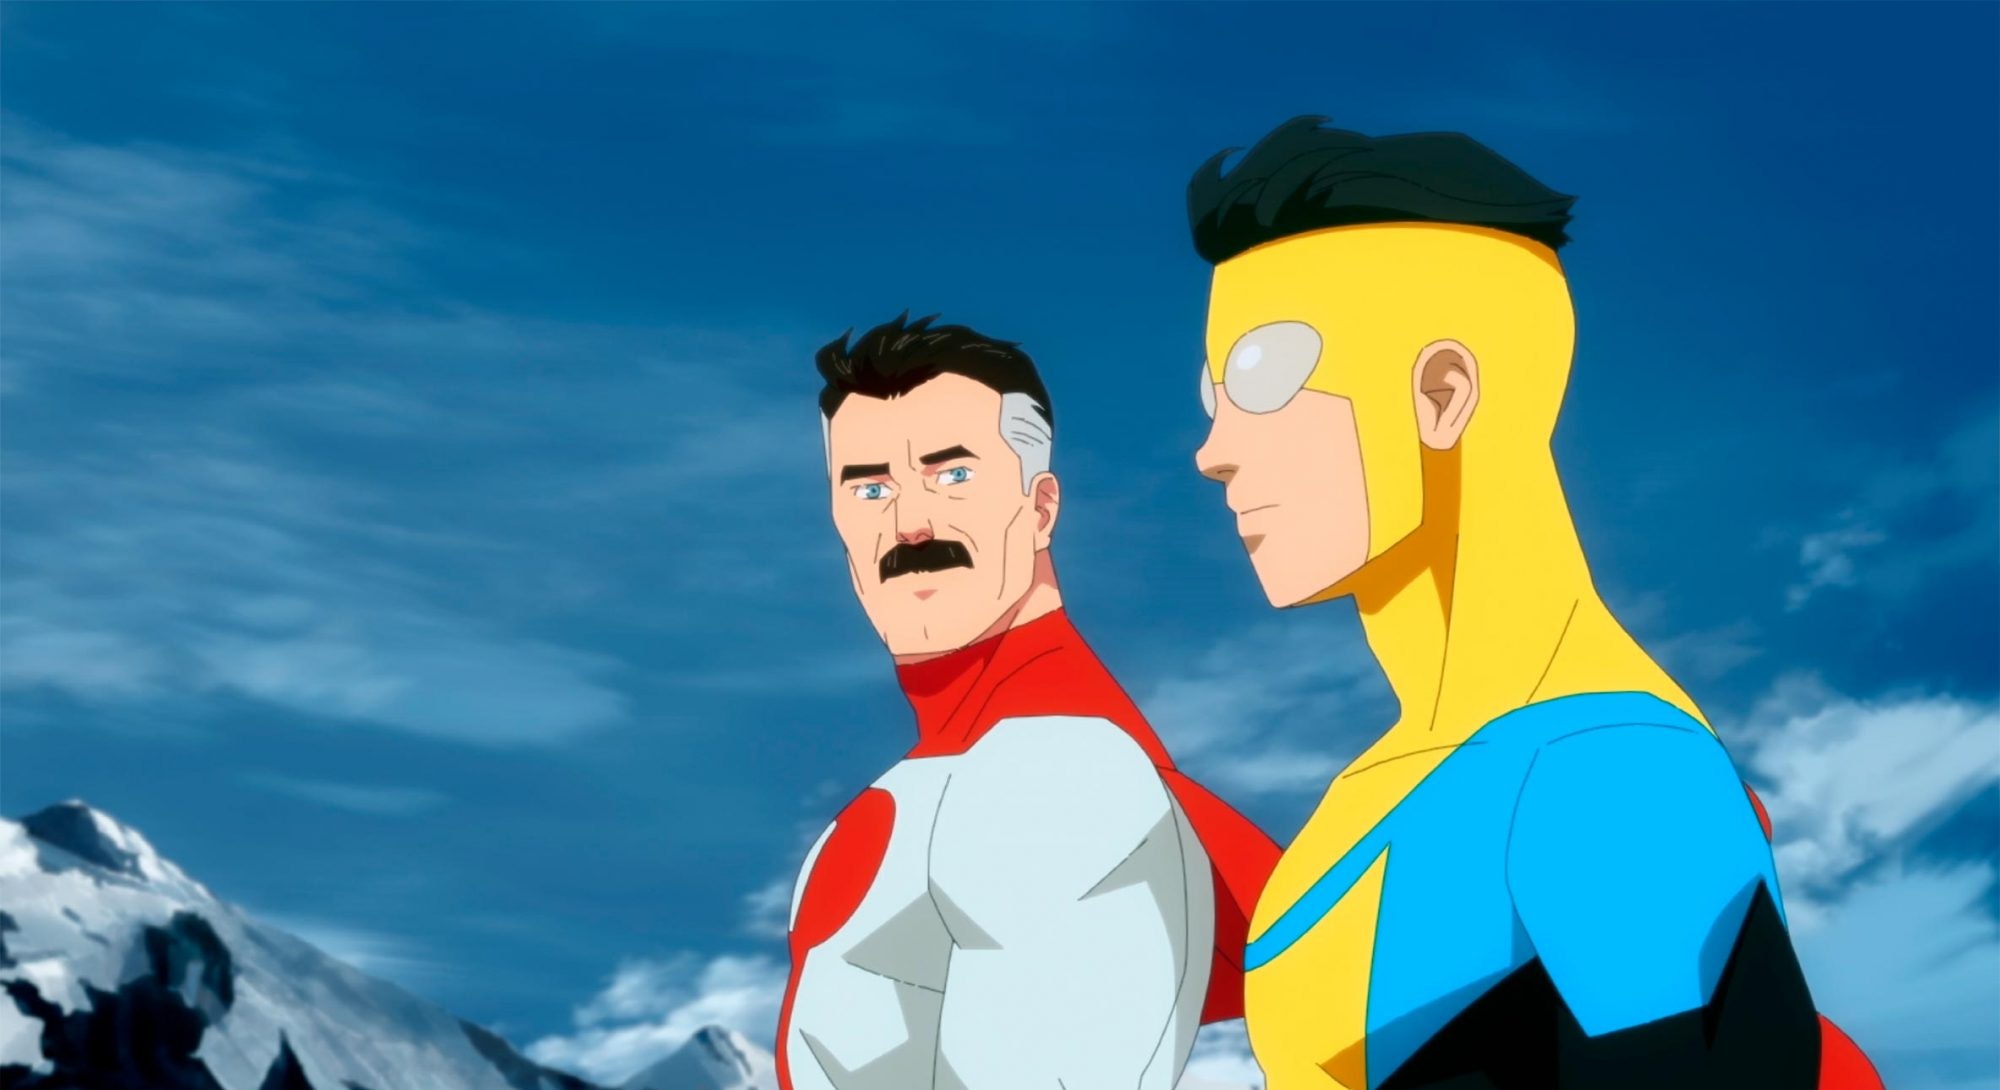 Amazon's Invincible - Latest Updates on Release Date, Cast, and Plot in 2022